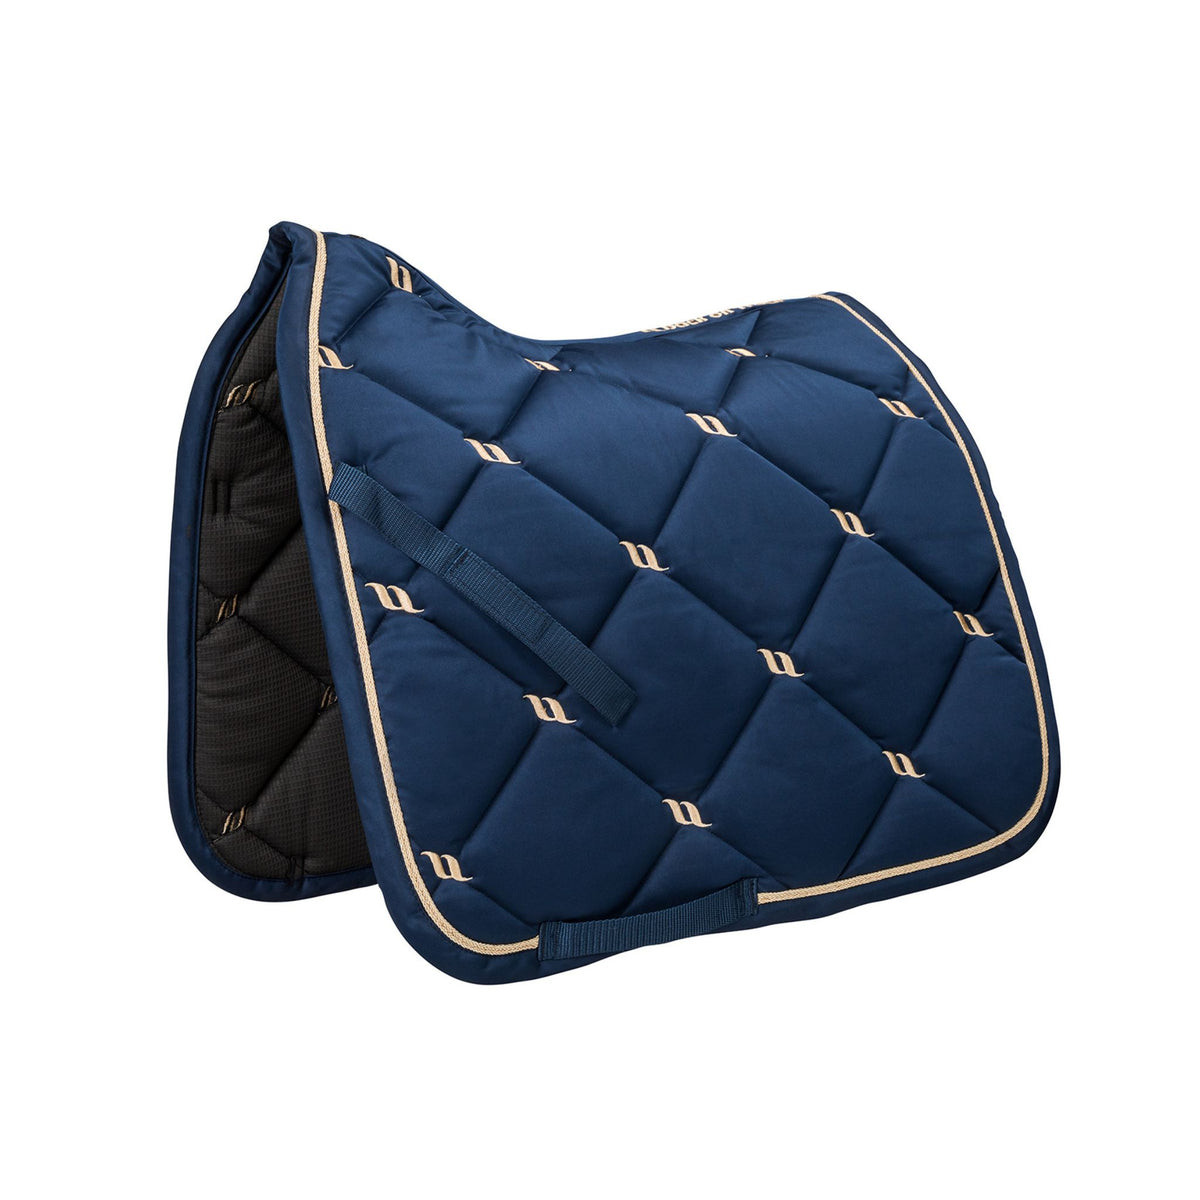 Dressage saddle pad with satin finish and gold details in navy.